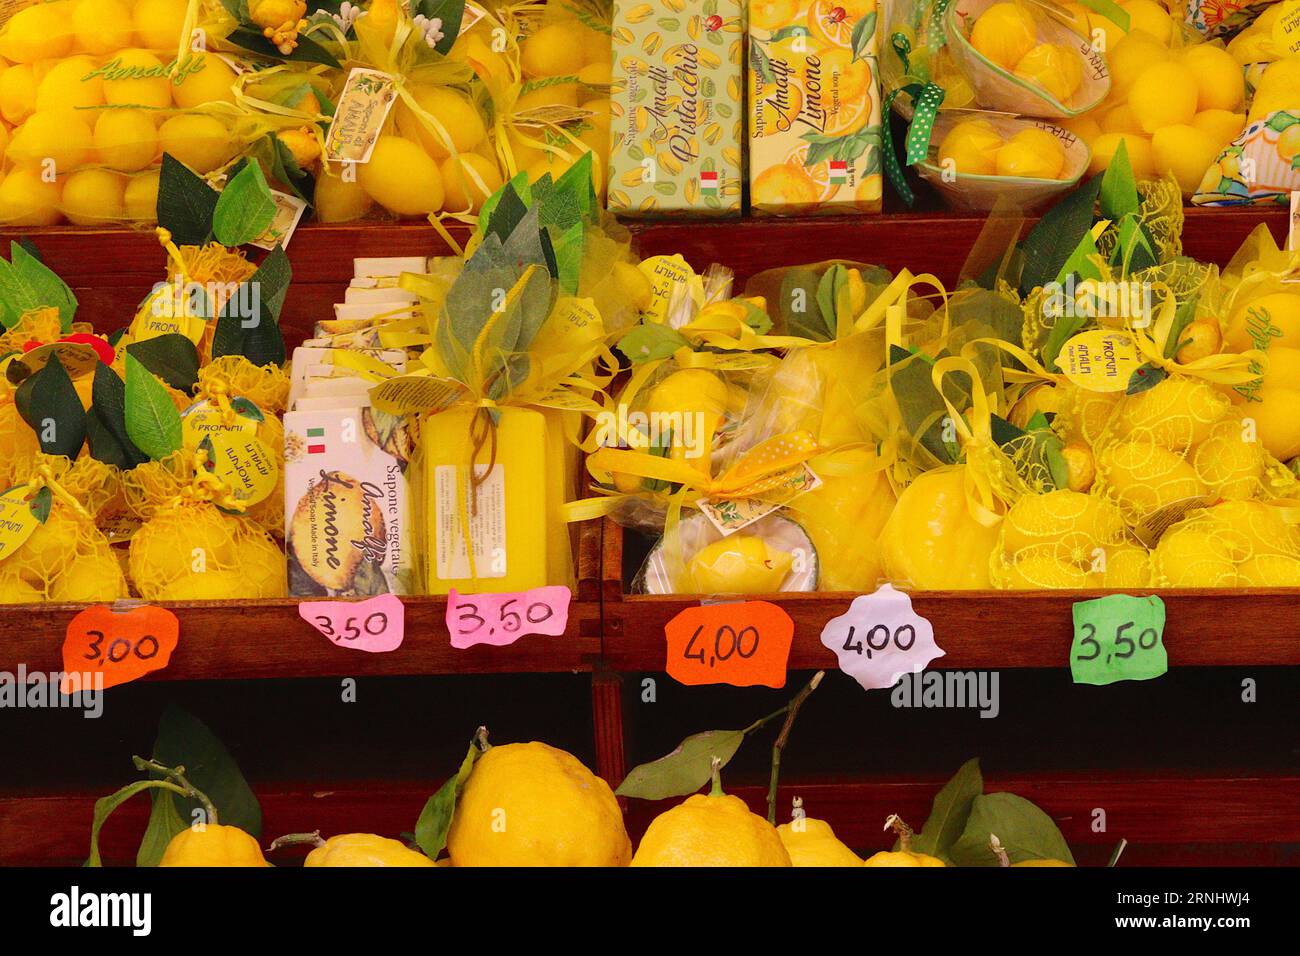 A n Italian trader specializing in a large variety of products and souvenirs based on Amalfi lemons displayed for sale at a shop in Amalfi, Italy. Stock Photo